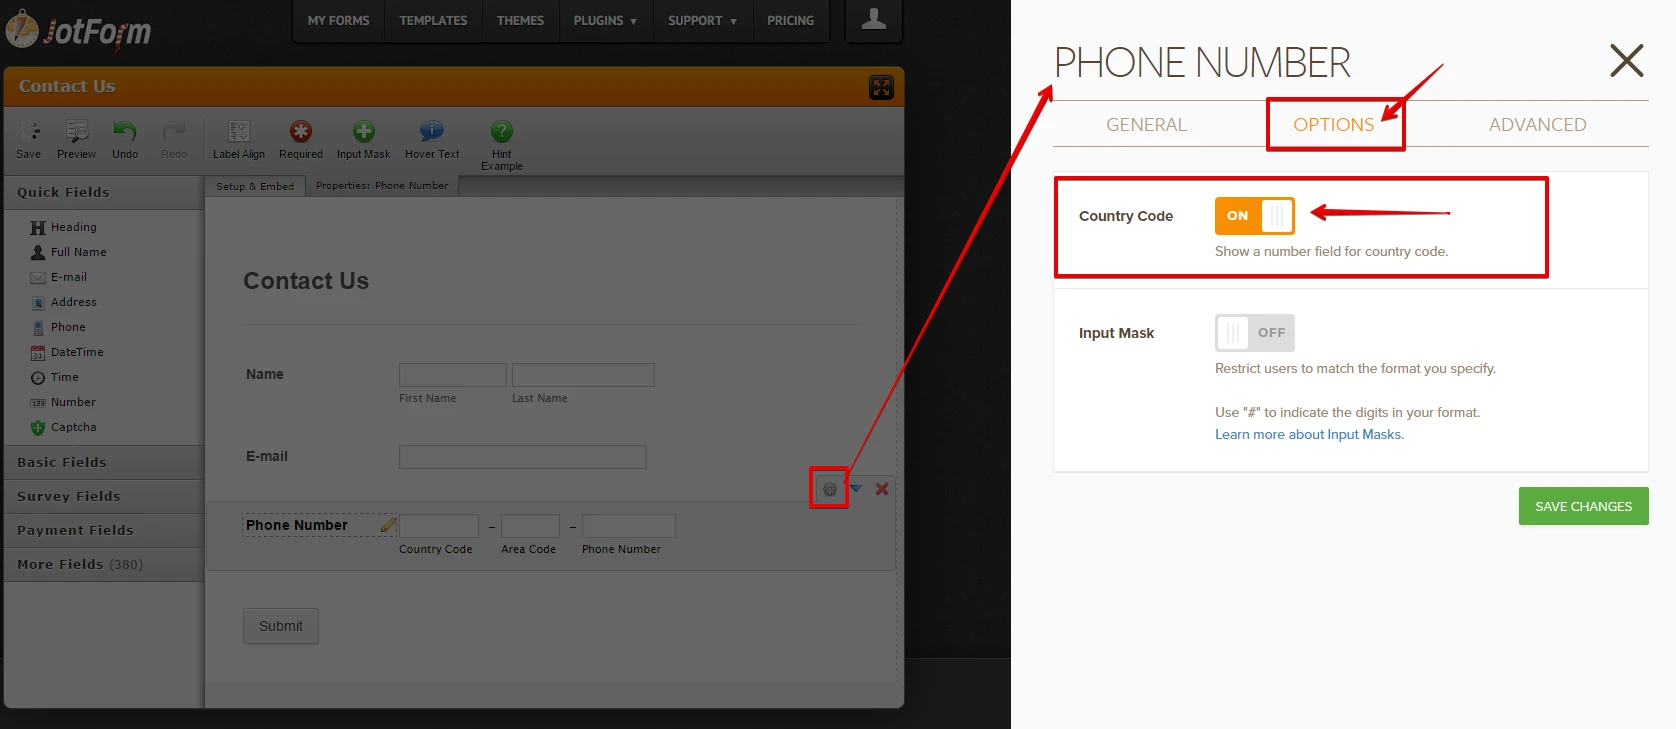 Please add an extension option for the phone number field Image 1 Screenshot 40